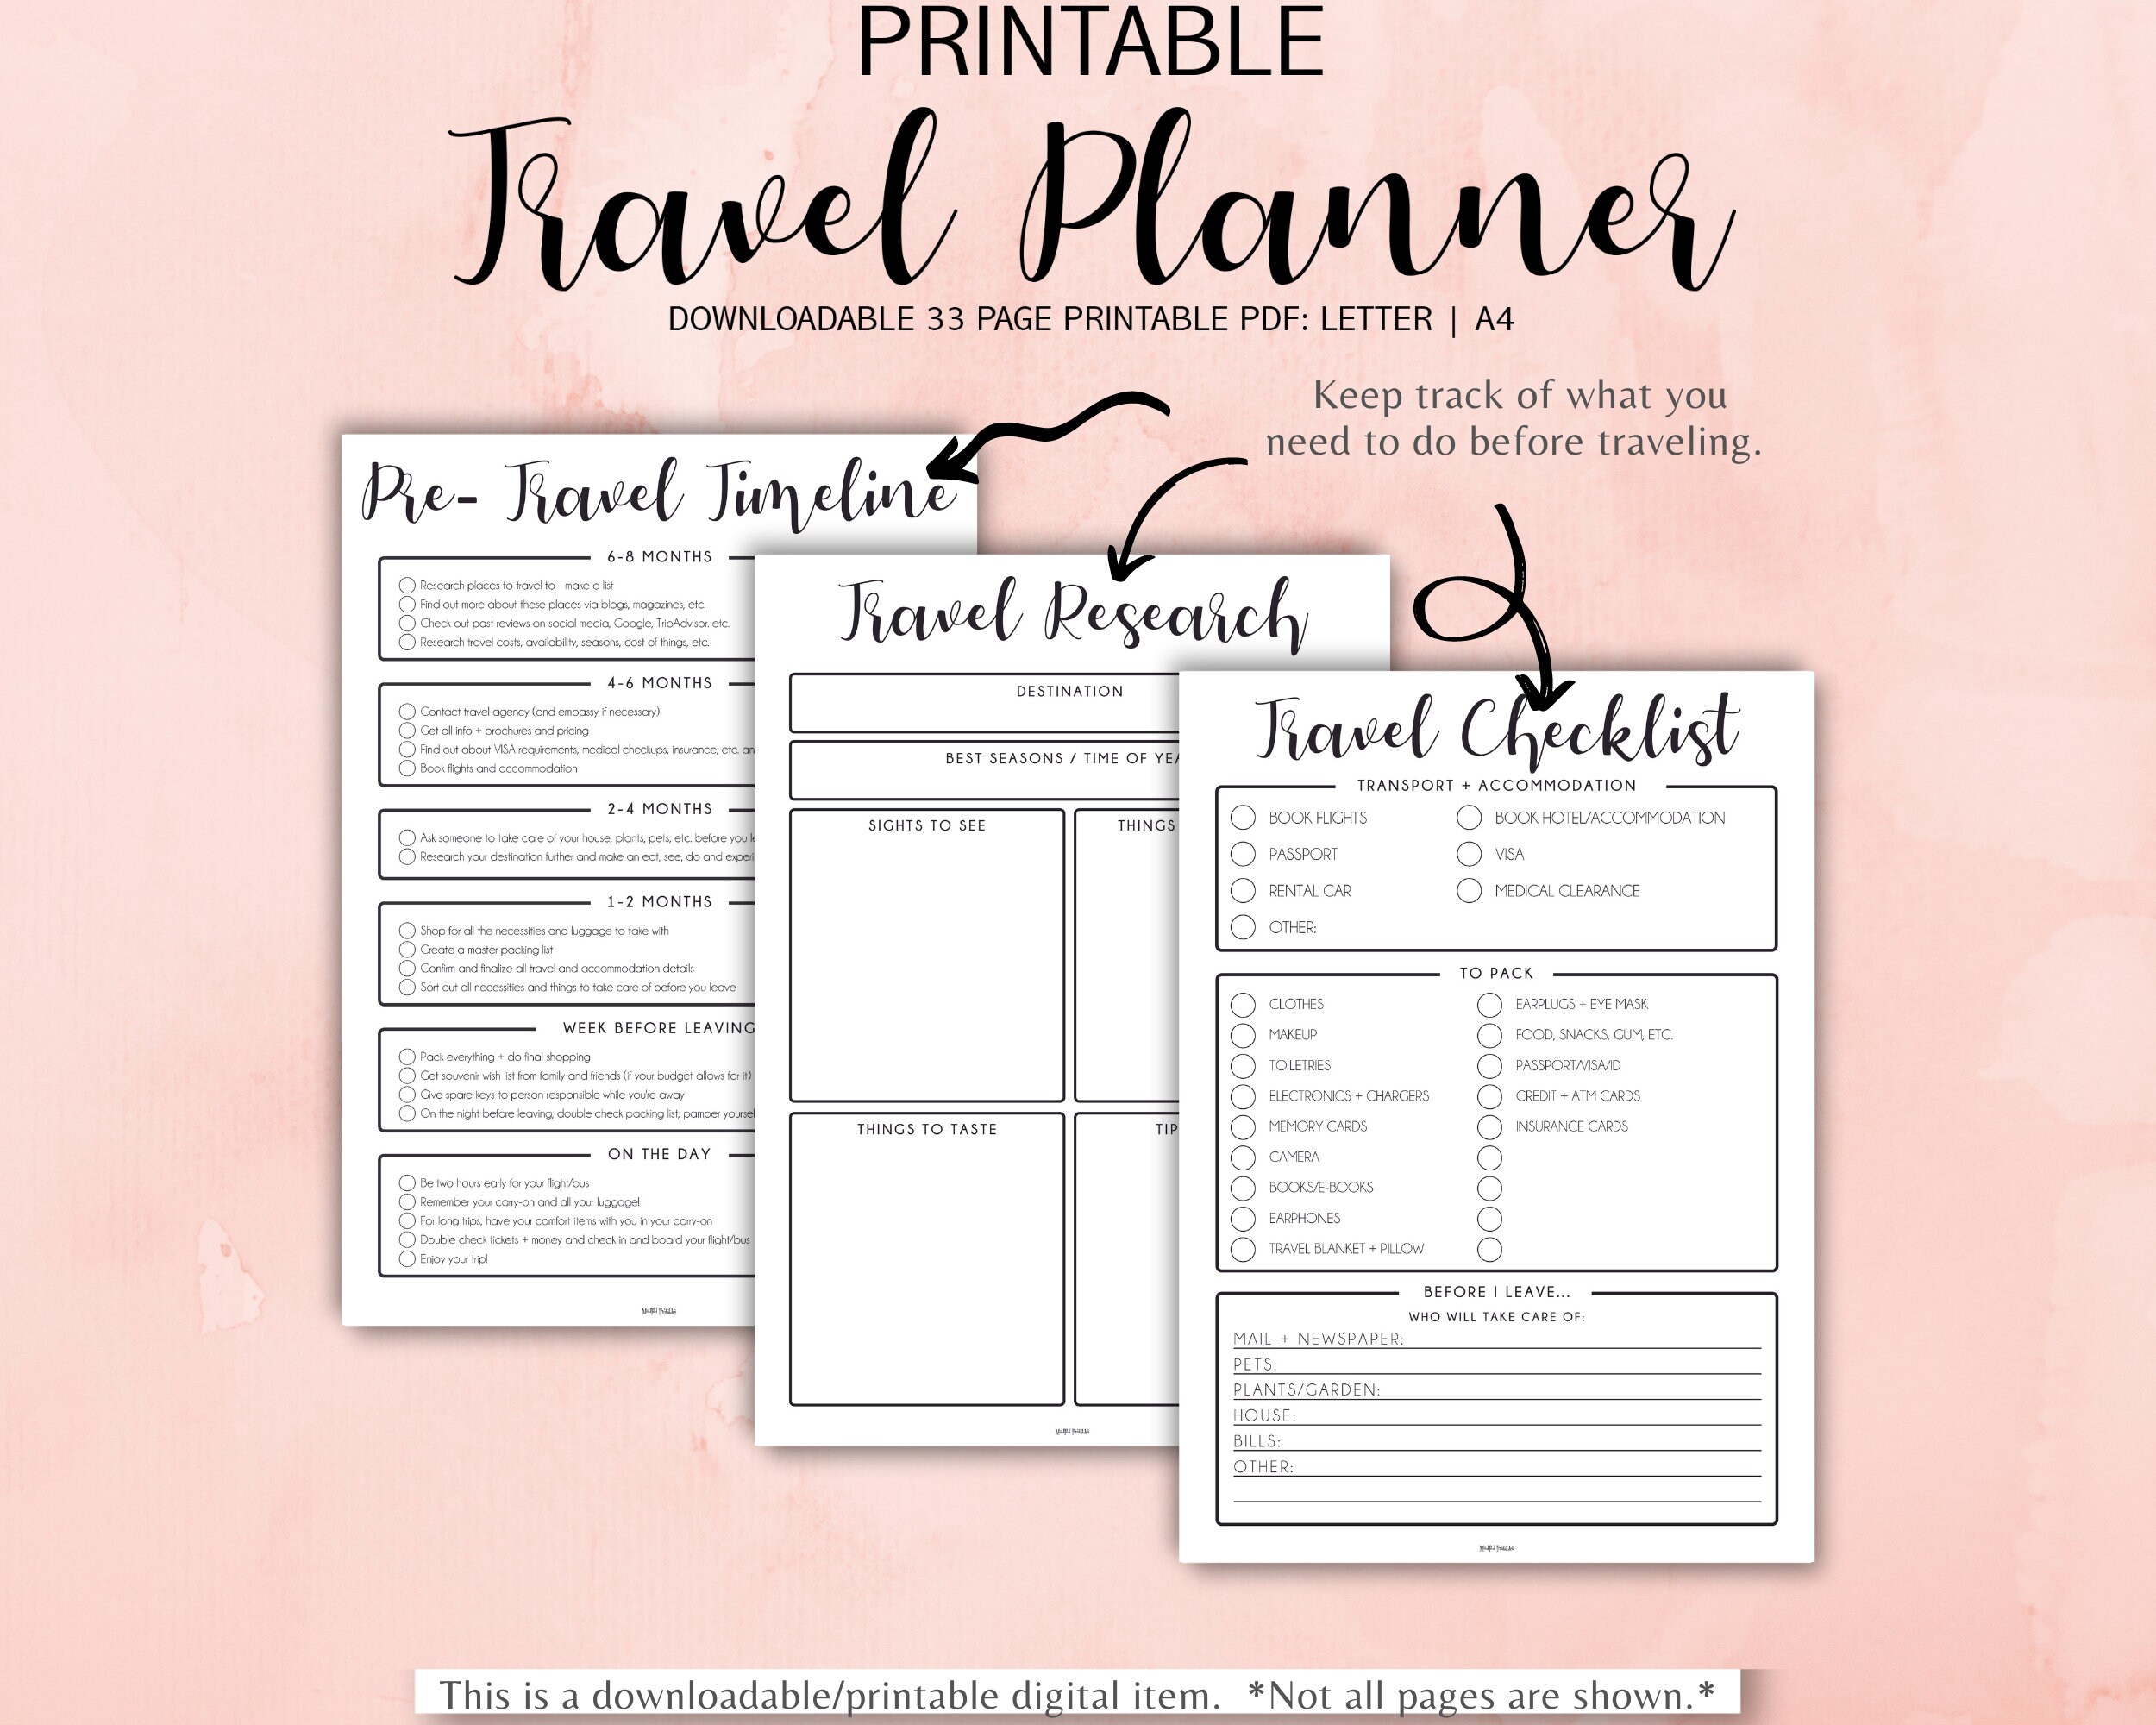 TRAVEL GUIDE Archives - Travel Planning and Itinerary Services